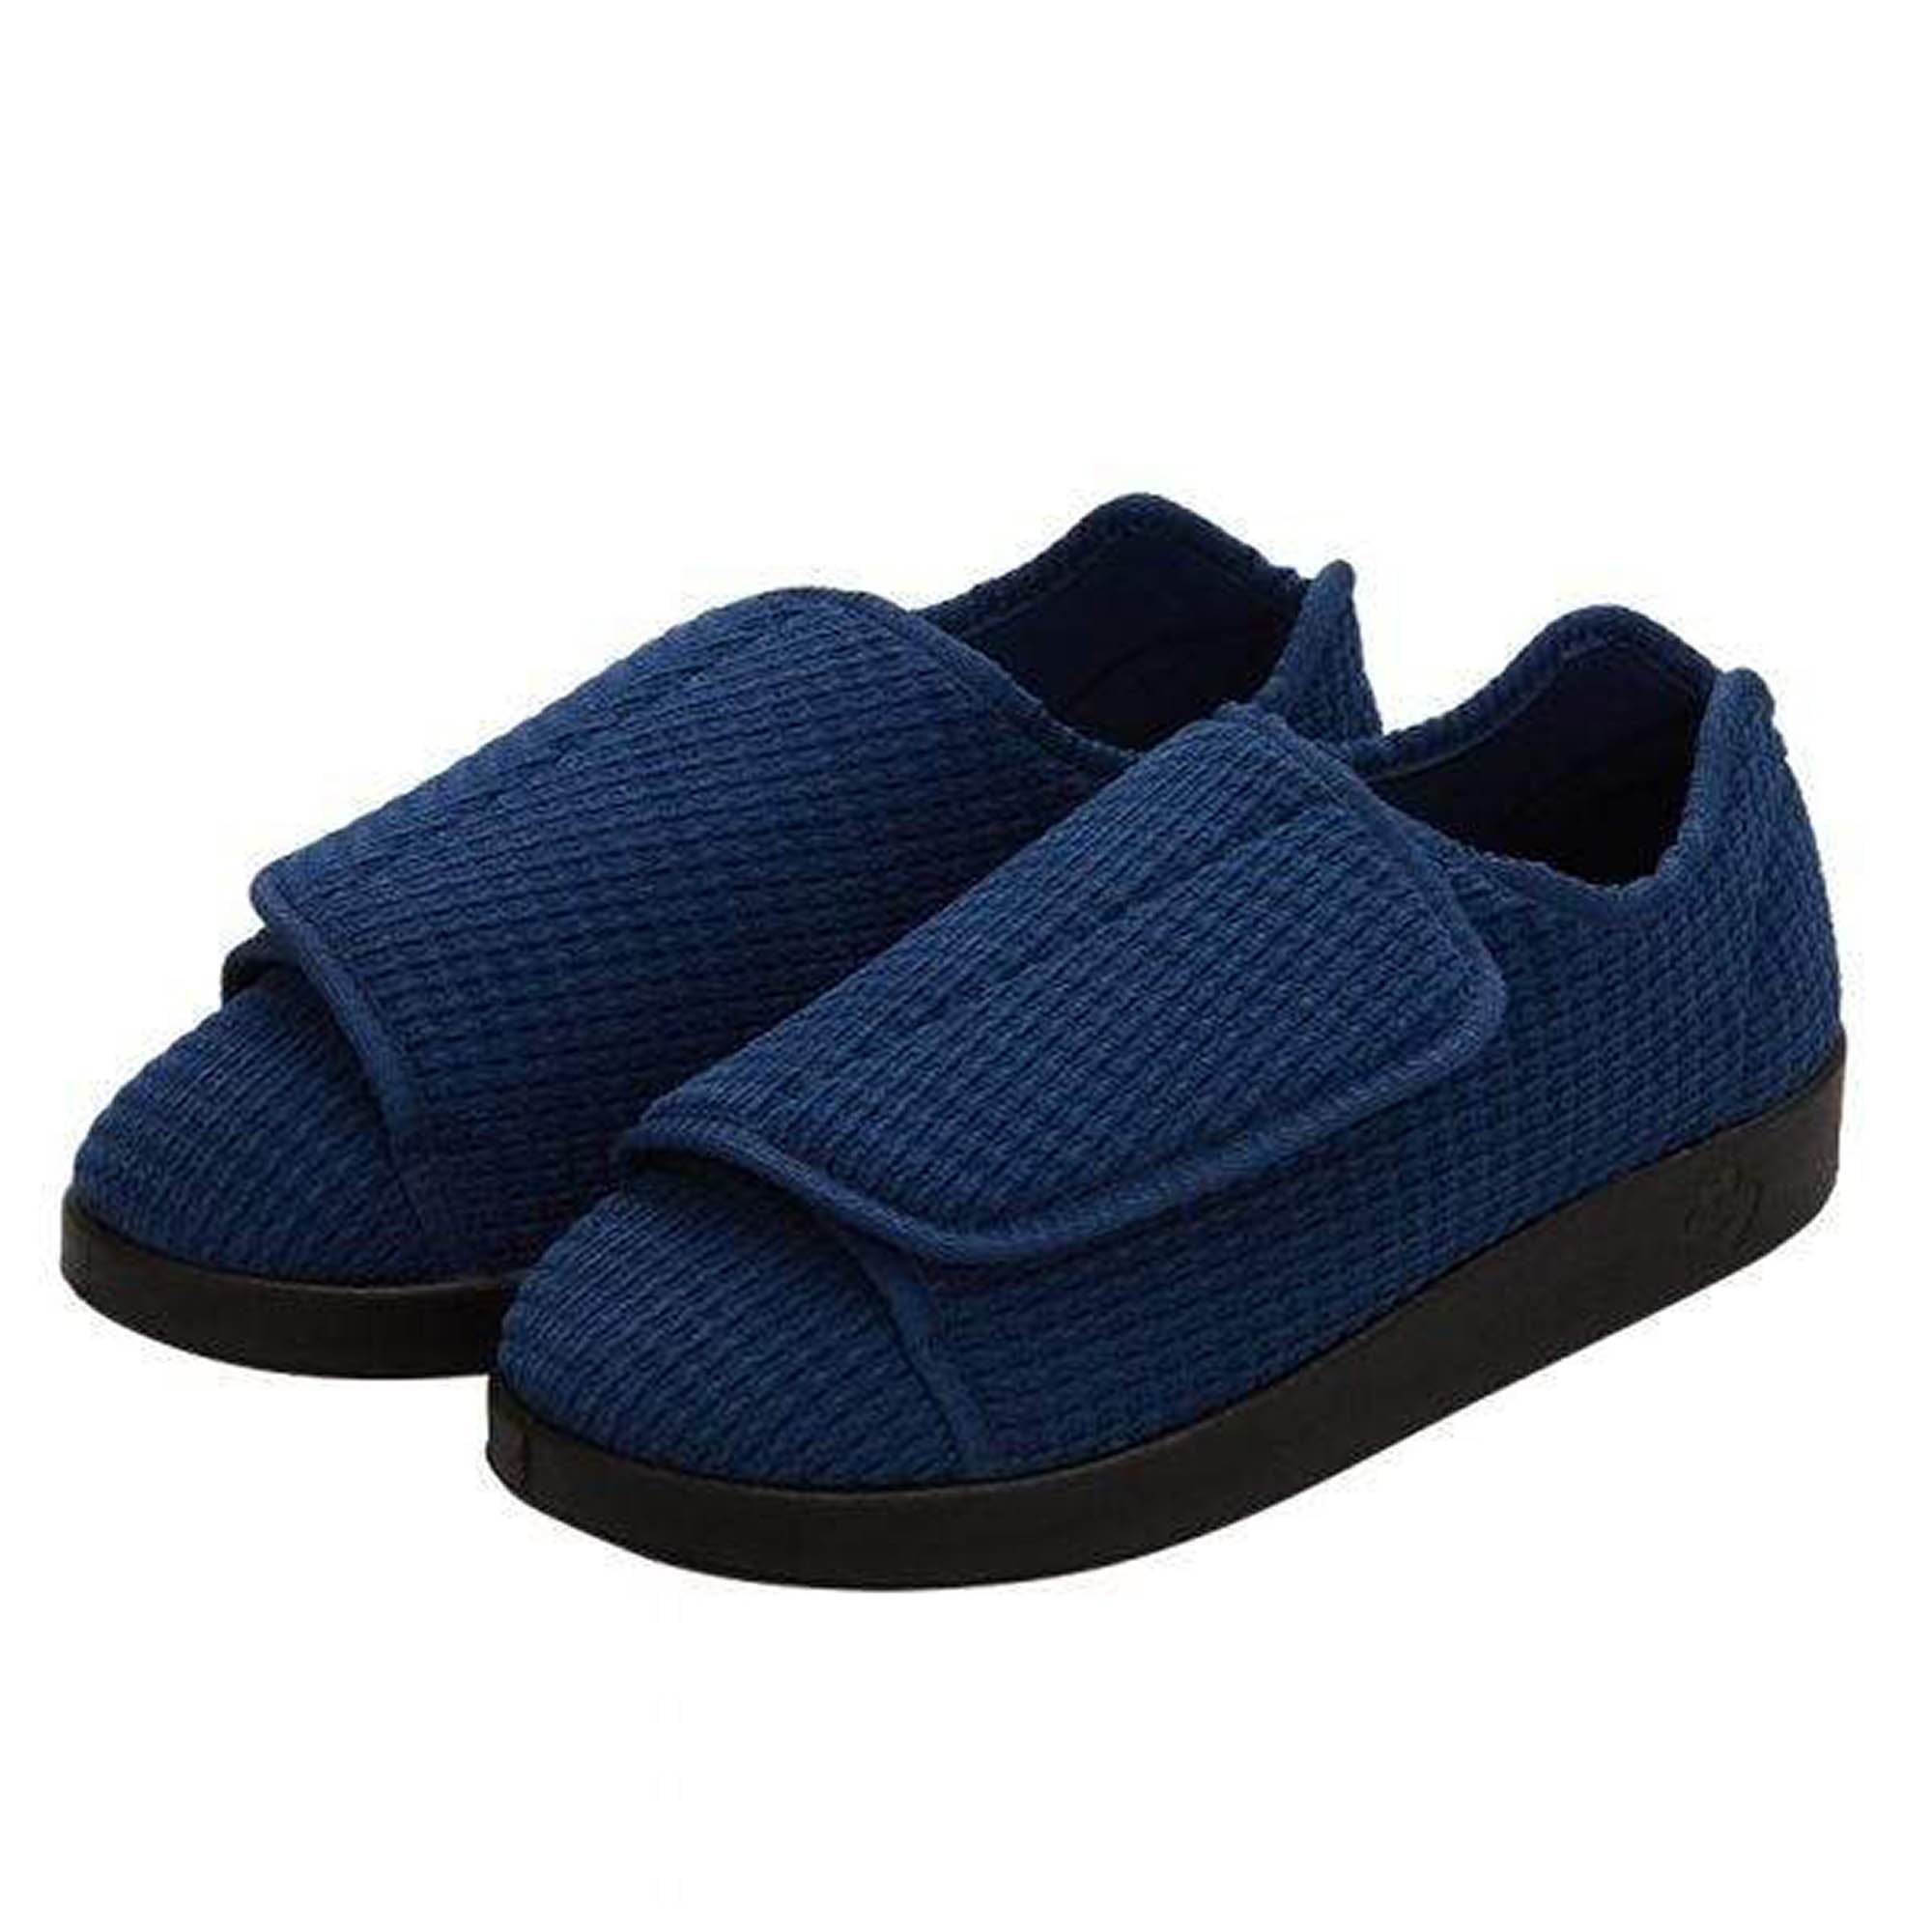 Silverts Men's Extra Extra Wide Slip-Resistant Slippers - Navy - 14